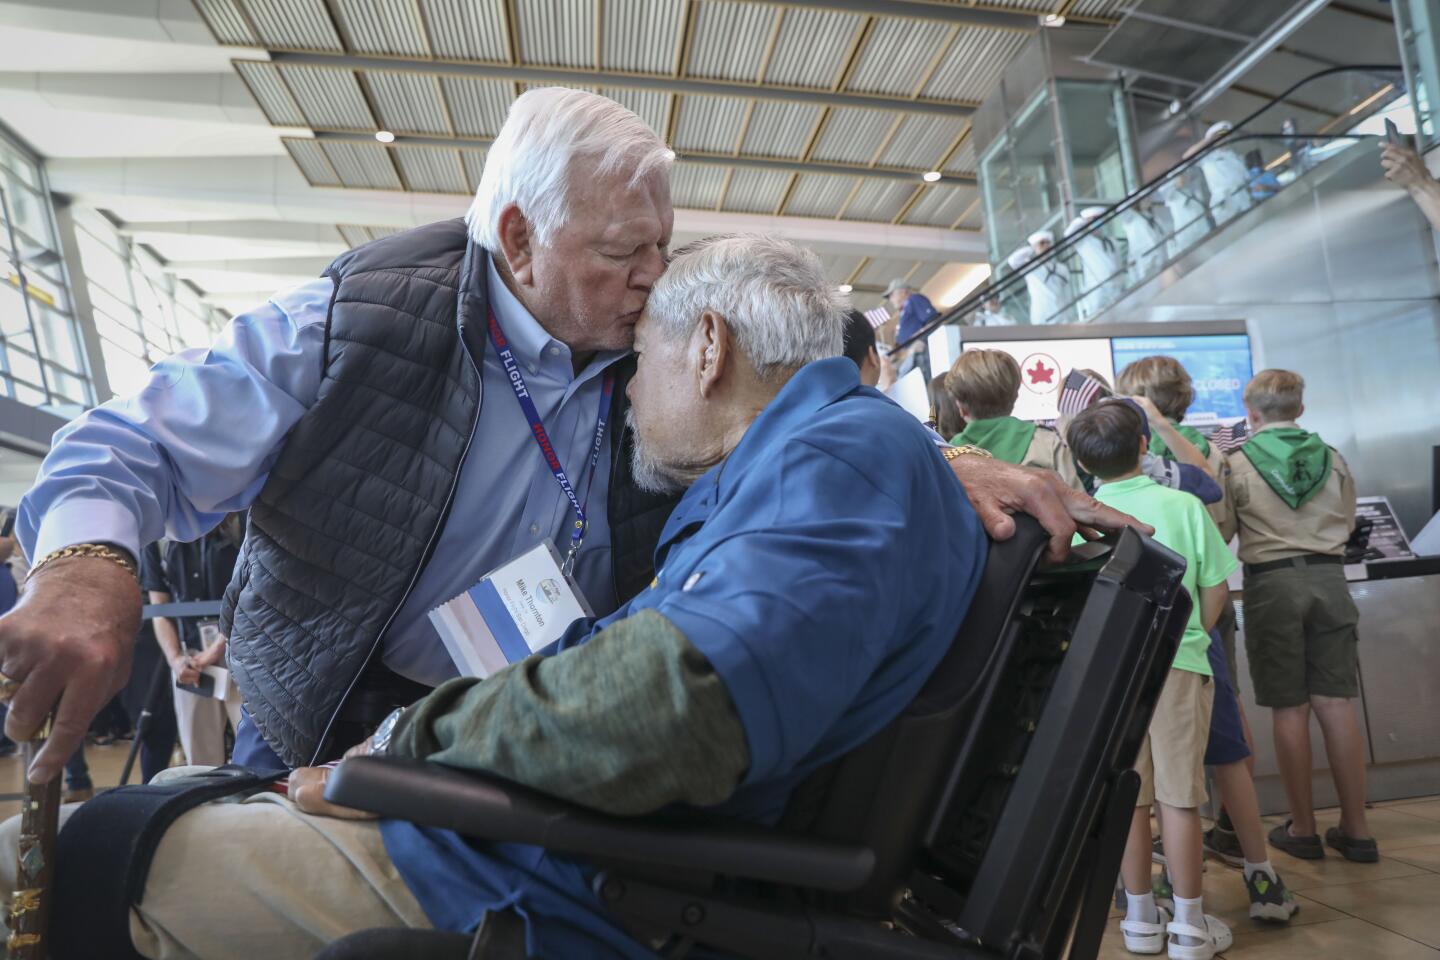 Navy Medal of Honor recipient Veteran Mike Thornton, a retired Navy Seal, greets fellow Navy Seal Moki Martin after arriving back in San Diego from an Honor Flight tour, at the San Diego International Airport on Sunday, April 28, 2024.